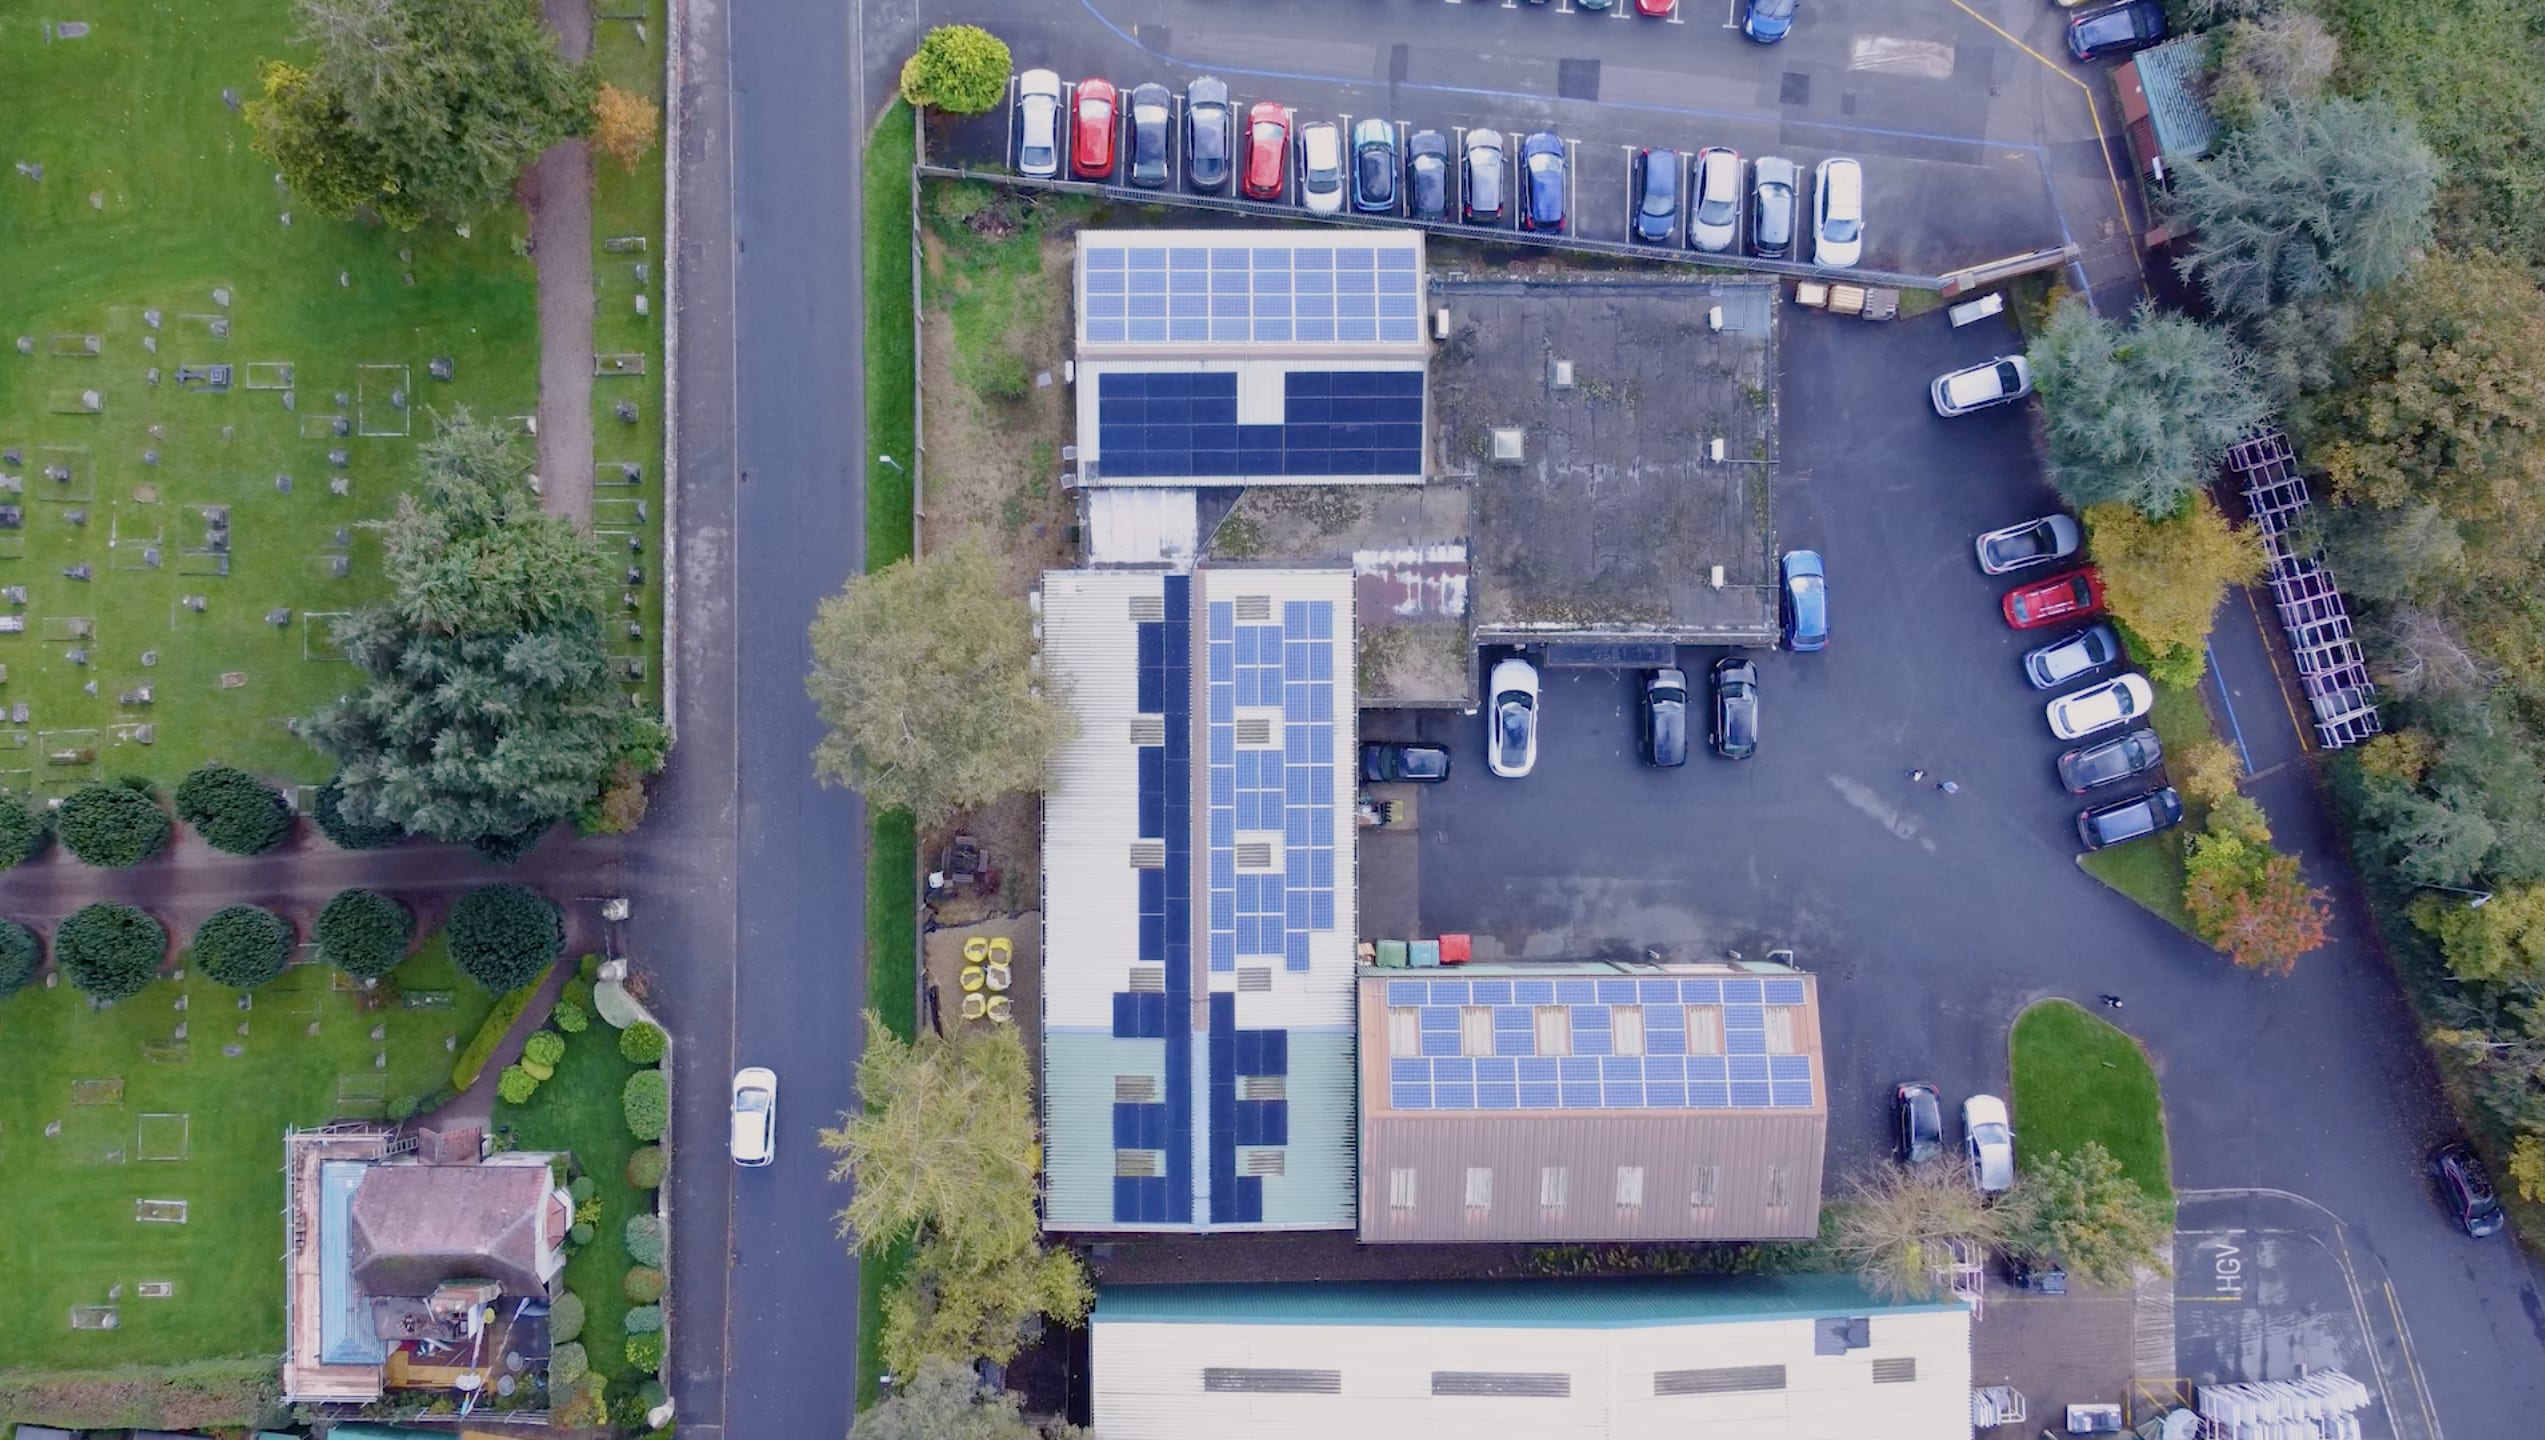 Aerial shot of building with solar panels